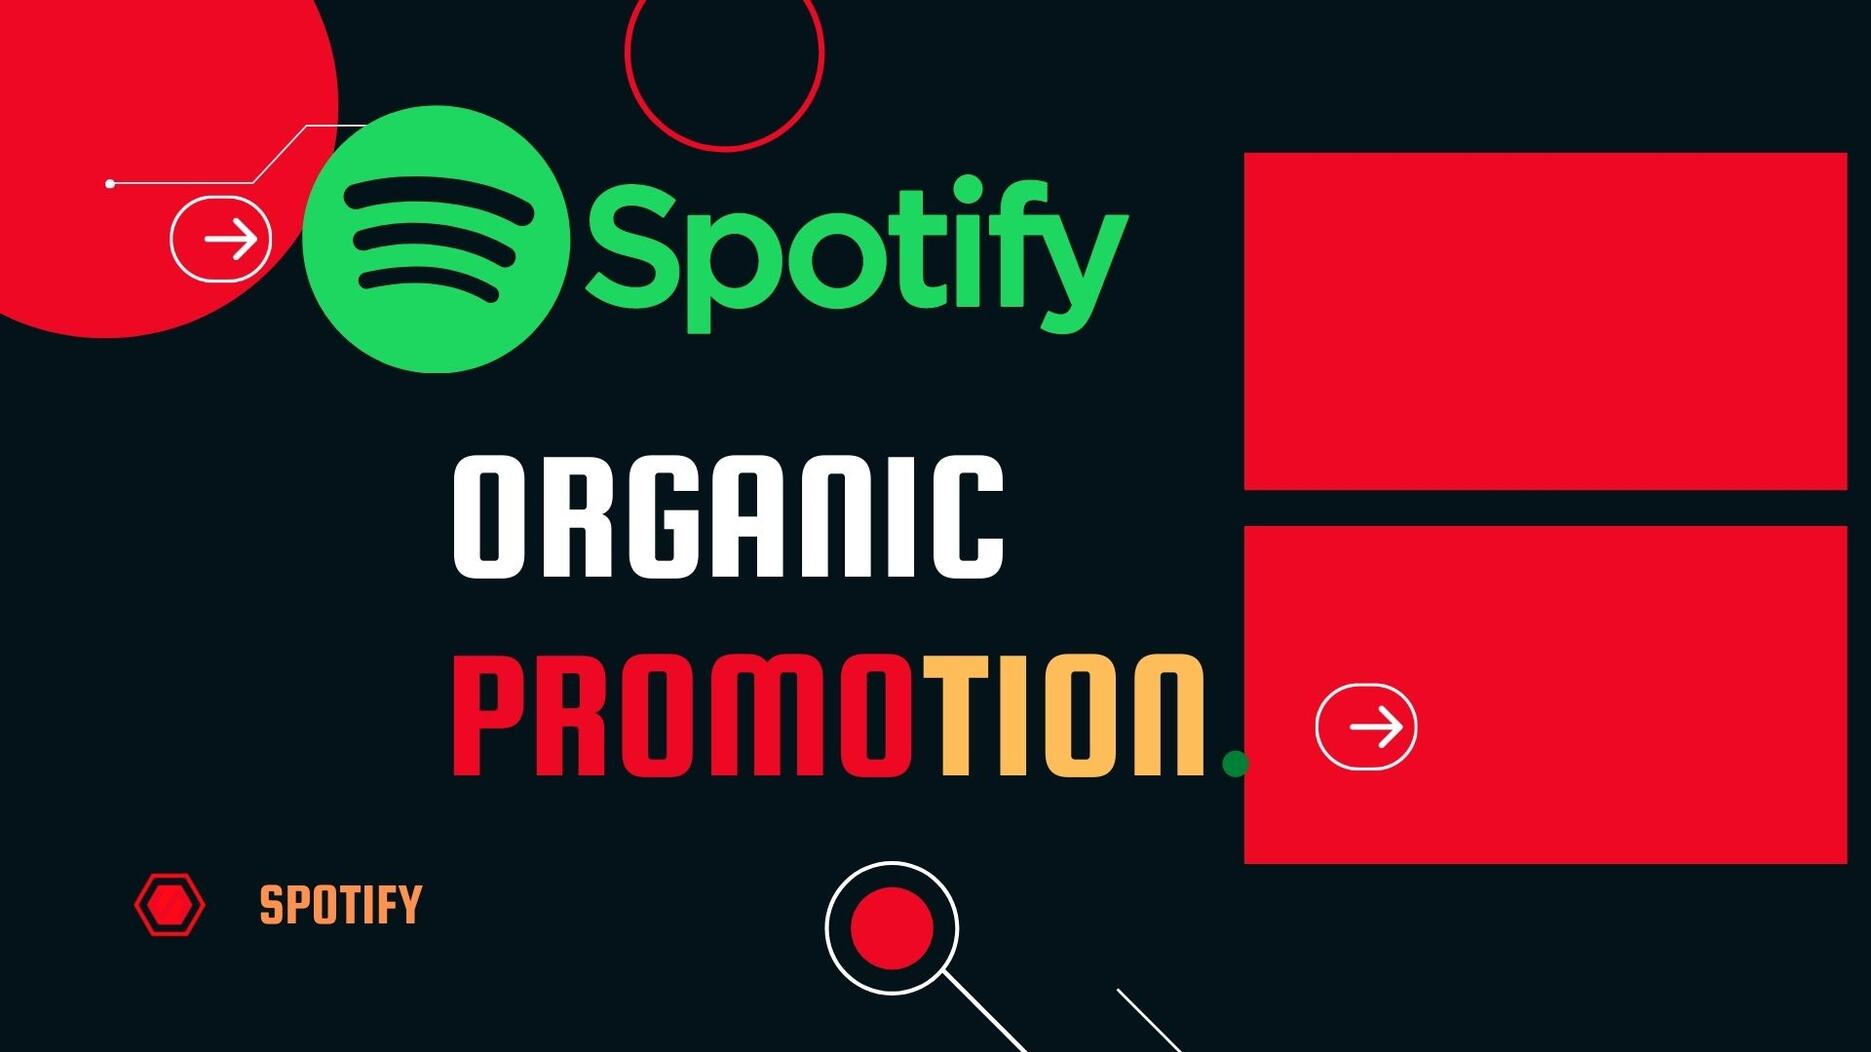 You will get 2000+ Spotify Monthly Listeners, 2500+ Artist Followers, 5000+ Spotify Track Plays